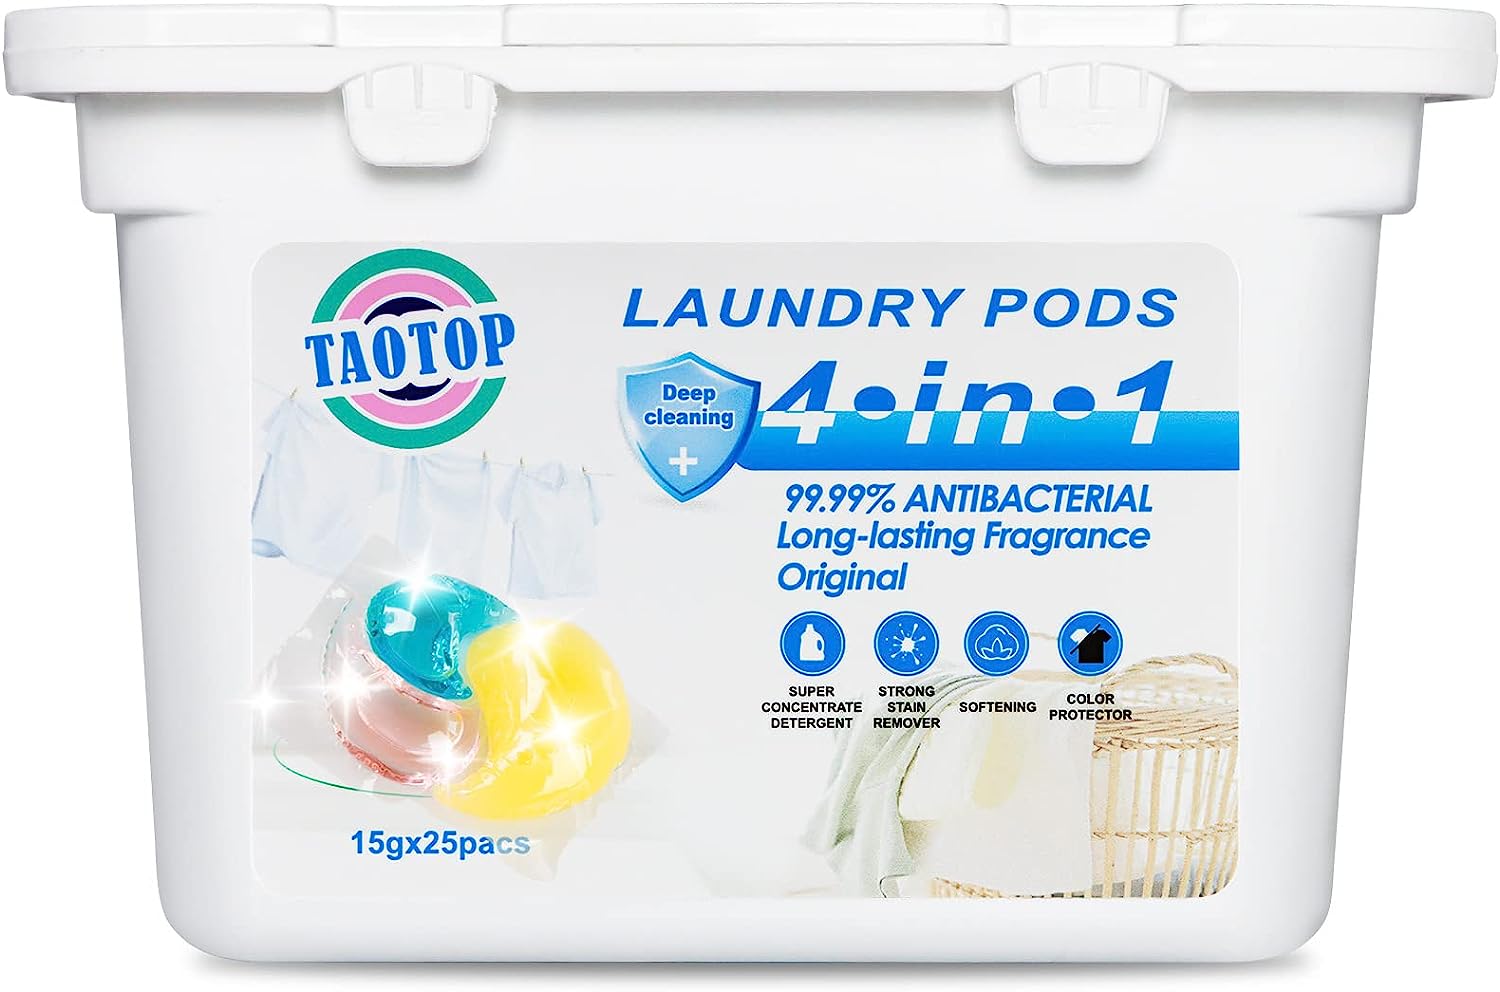 Molly's Suds Color Catcher Laundry Sheets